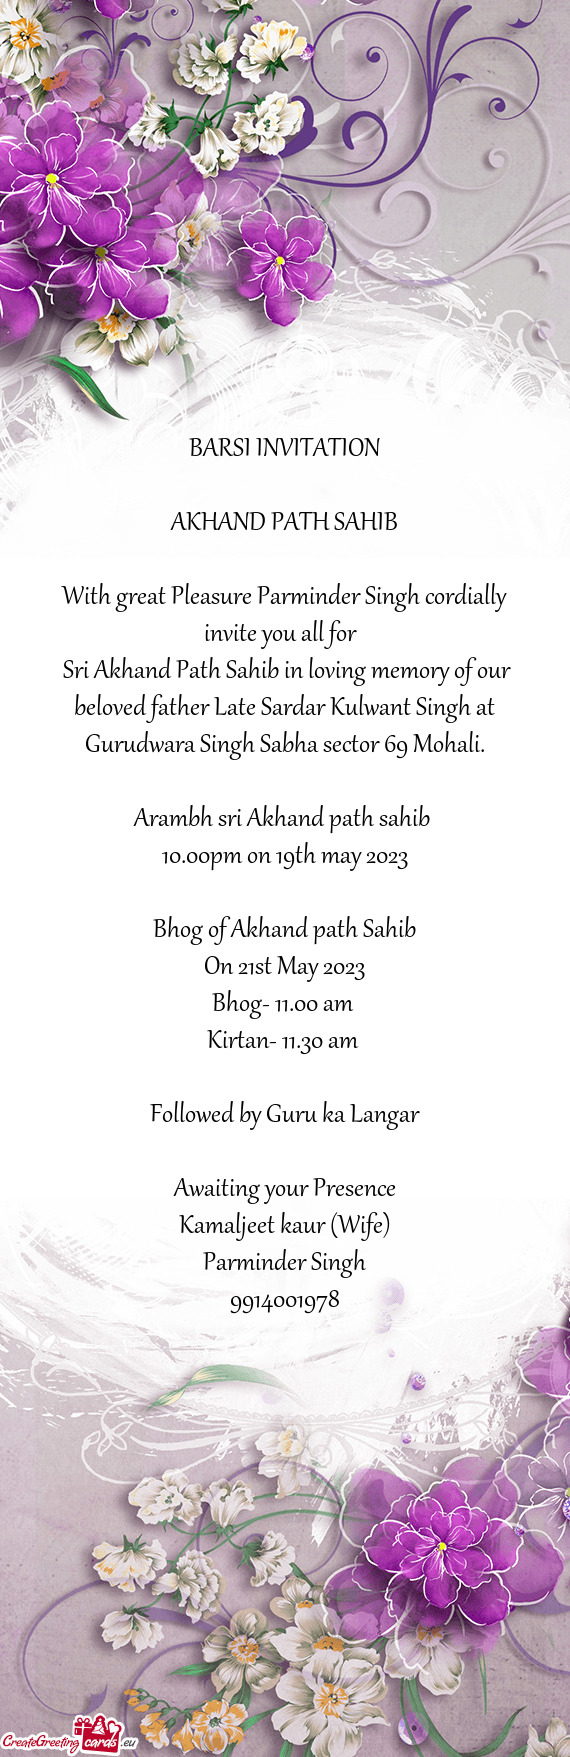 With great Pleasure Parminder Singh cordially invite you all for